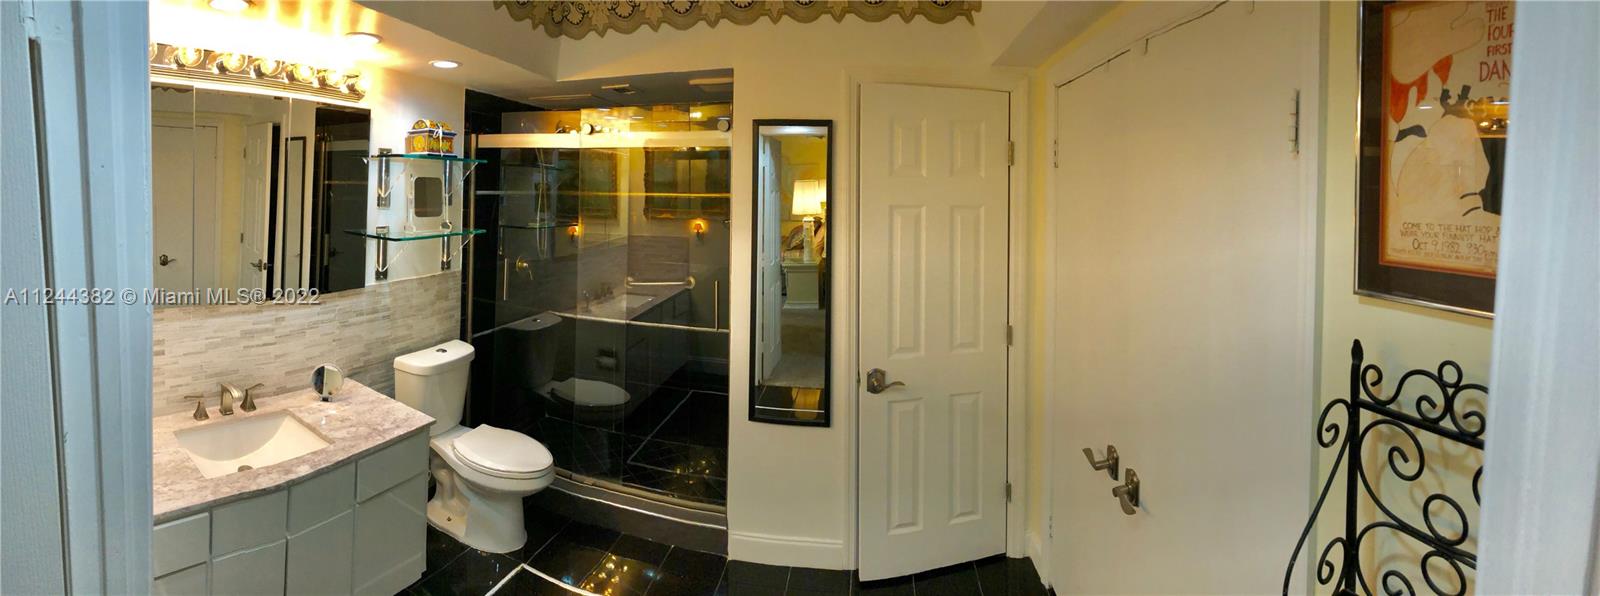 SPACIOUS PLUS+SIZED MASTER BEDROOM SPA STYLE BATHROOM WITH CUSTOM CLOSETS AND WALK-IN SHOWER